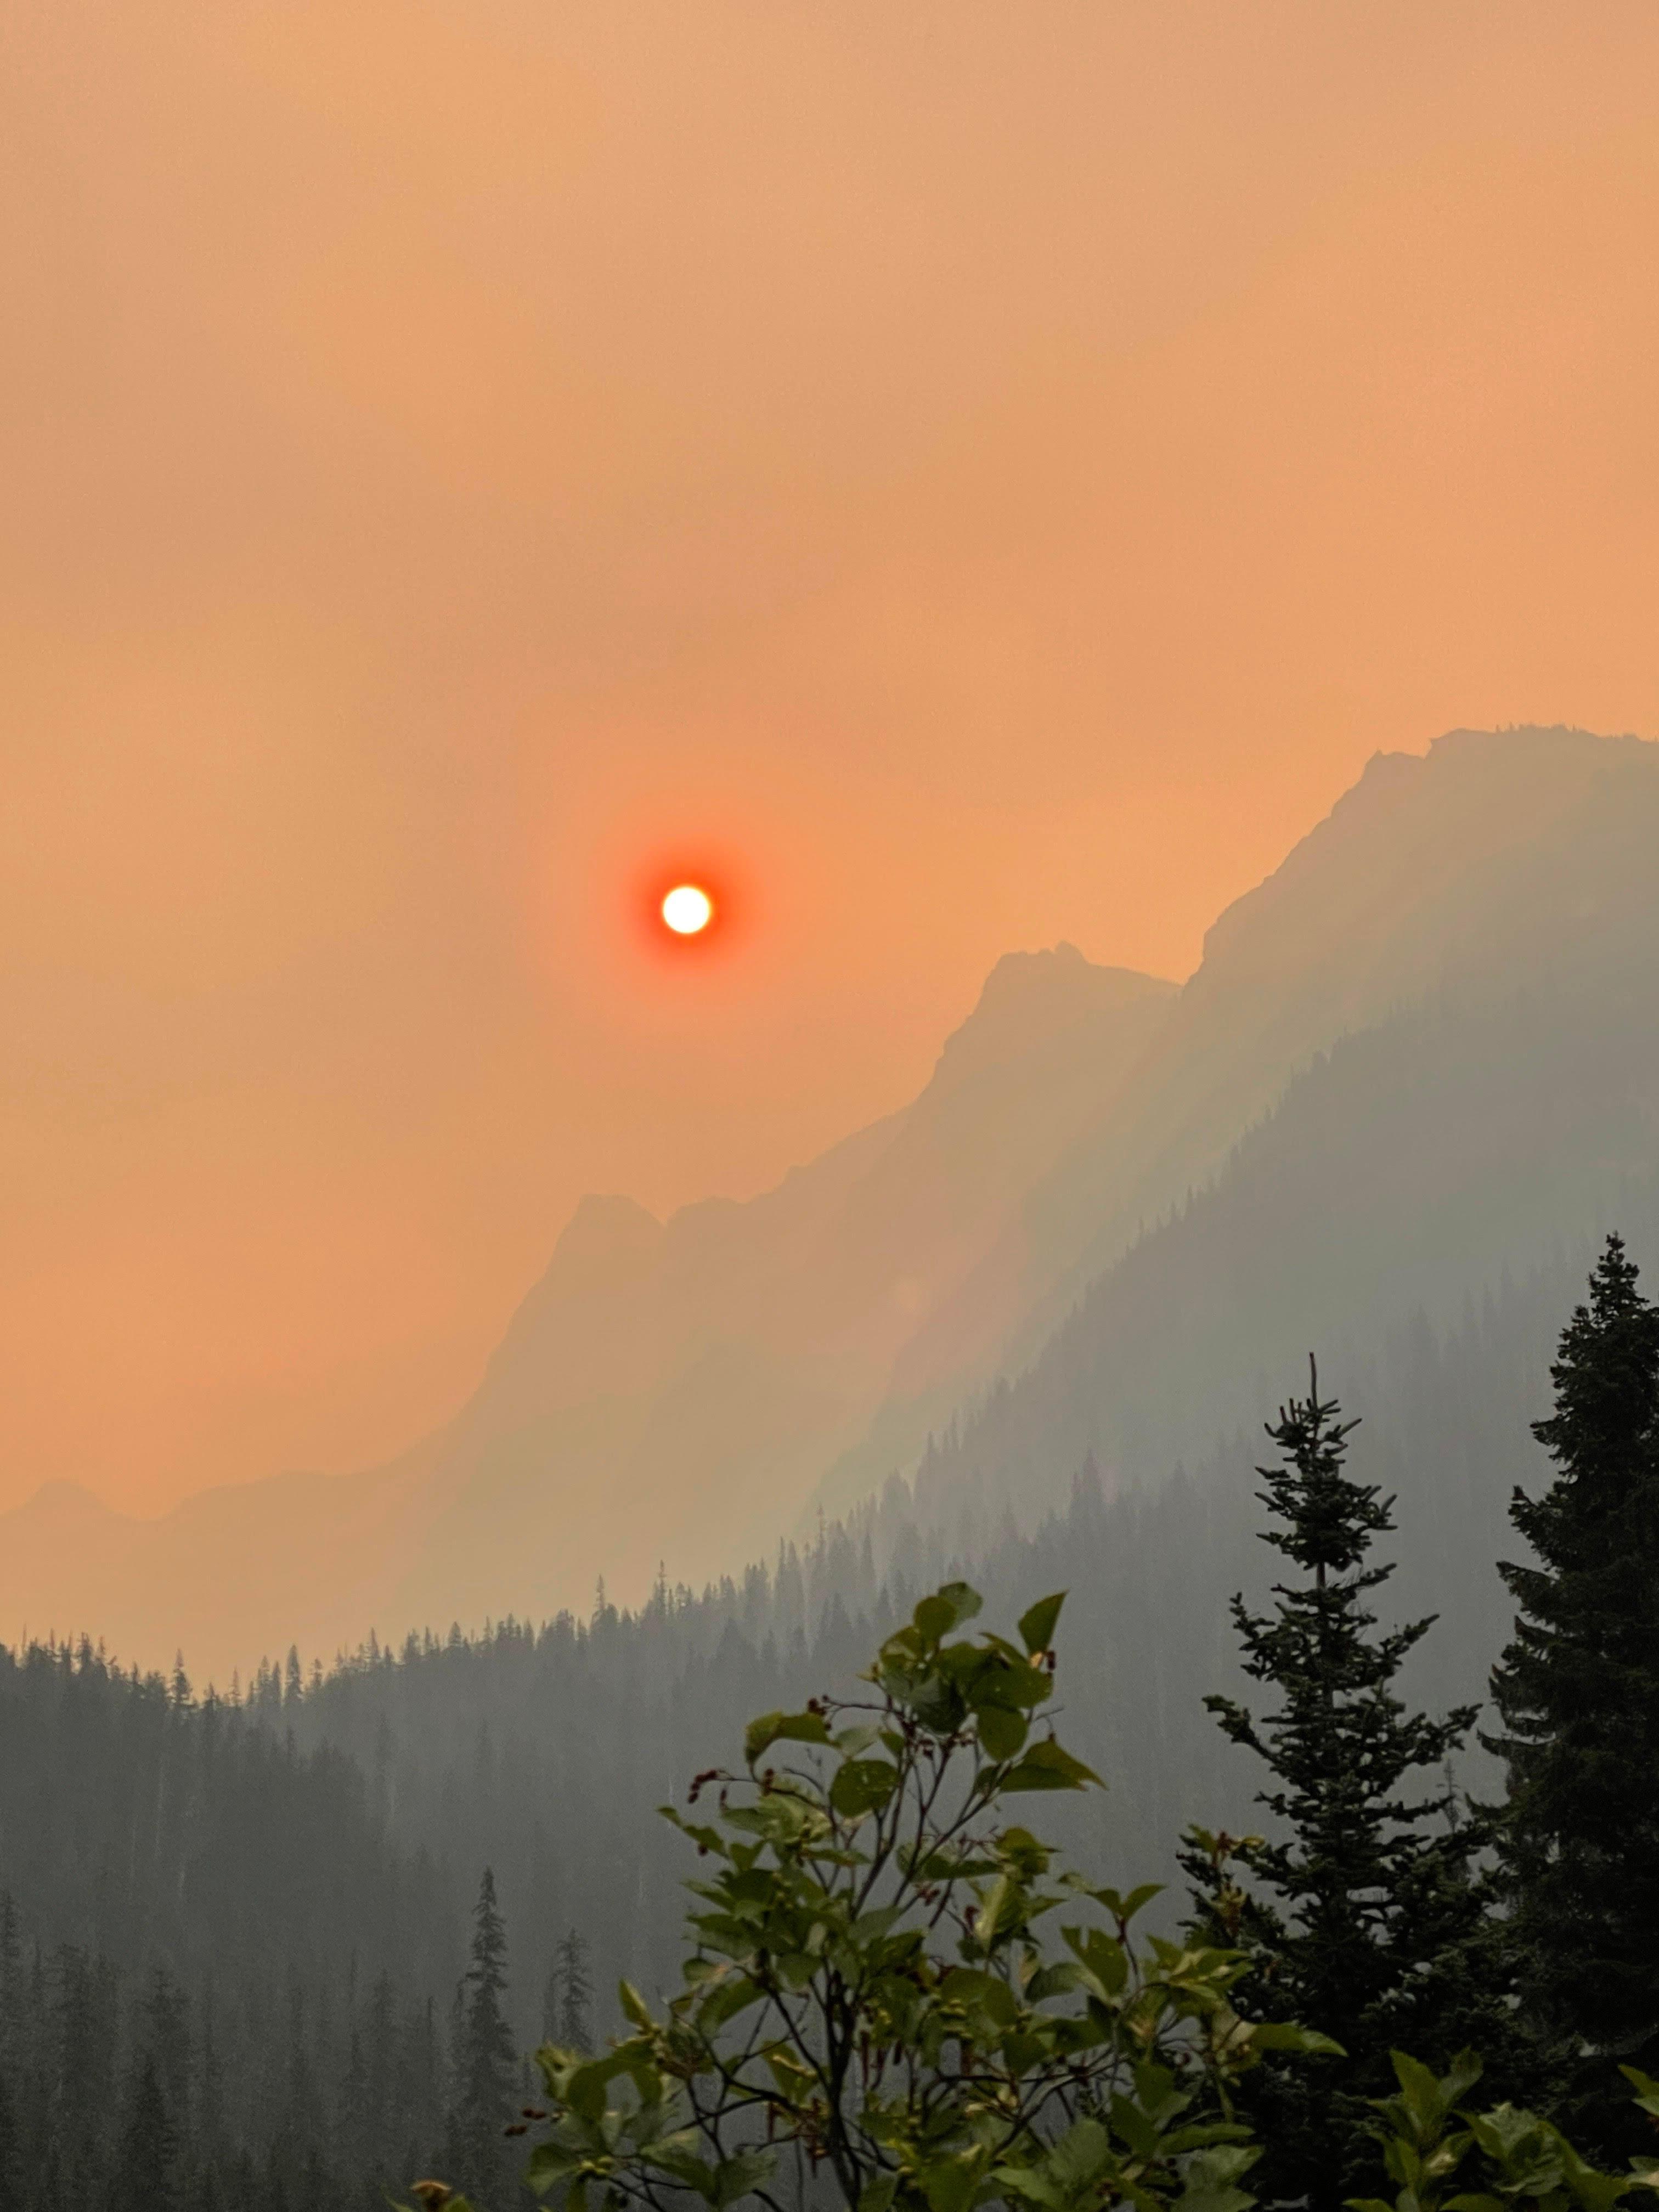 A mountain range silhouetted against a smoky sky. The sun is orange.